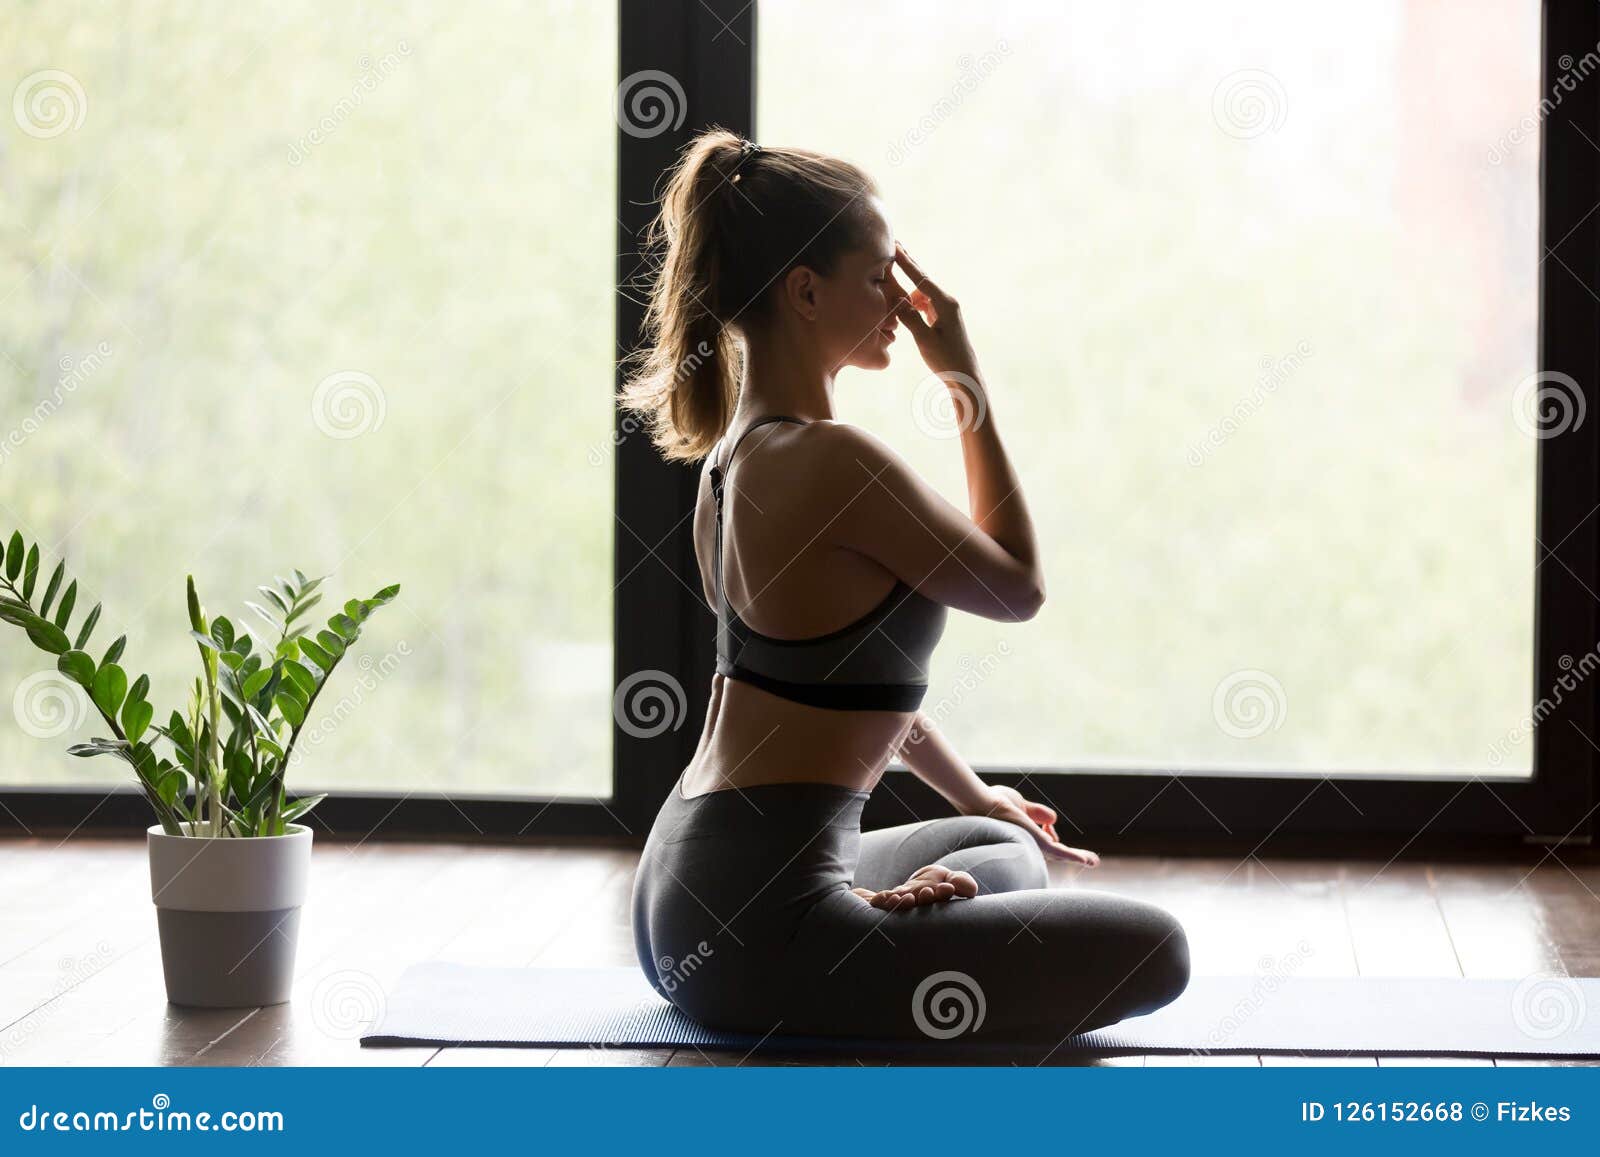 young sporty woman practicing alternate nostril breathing